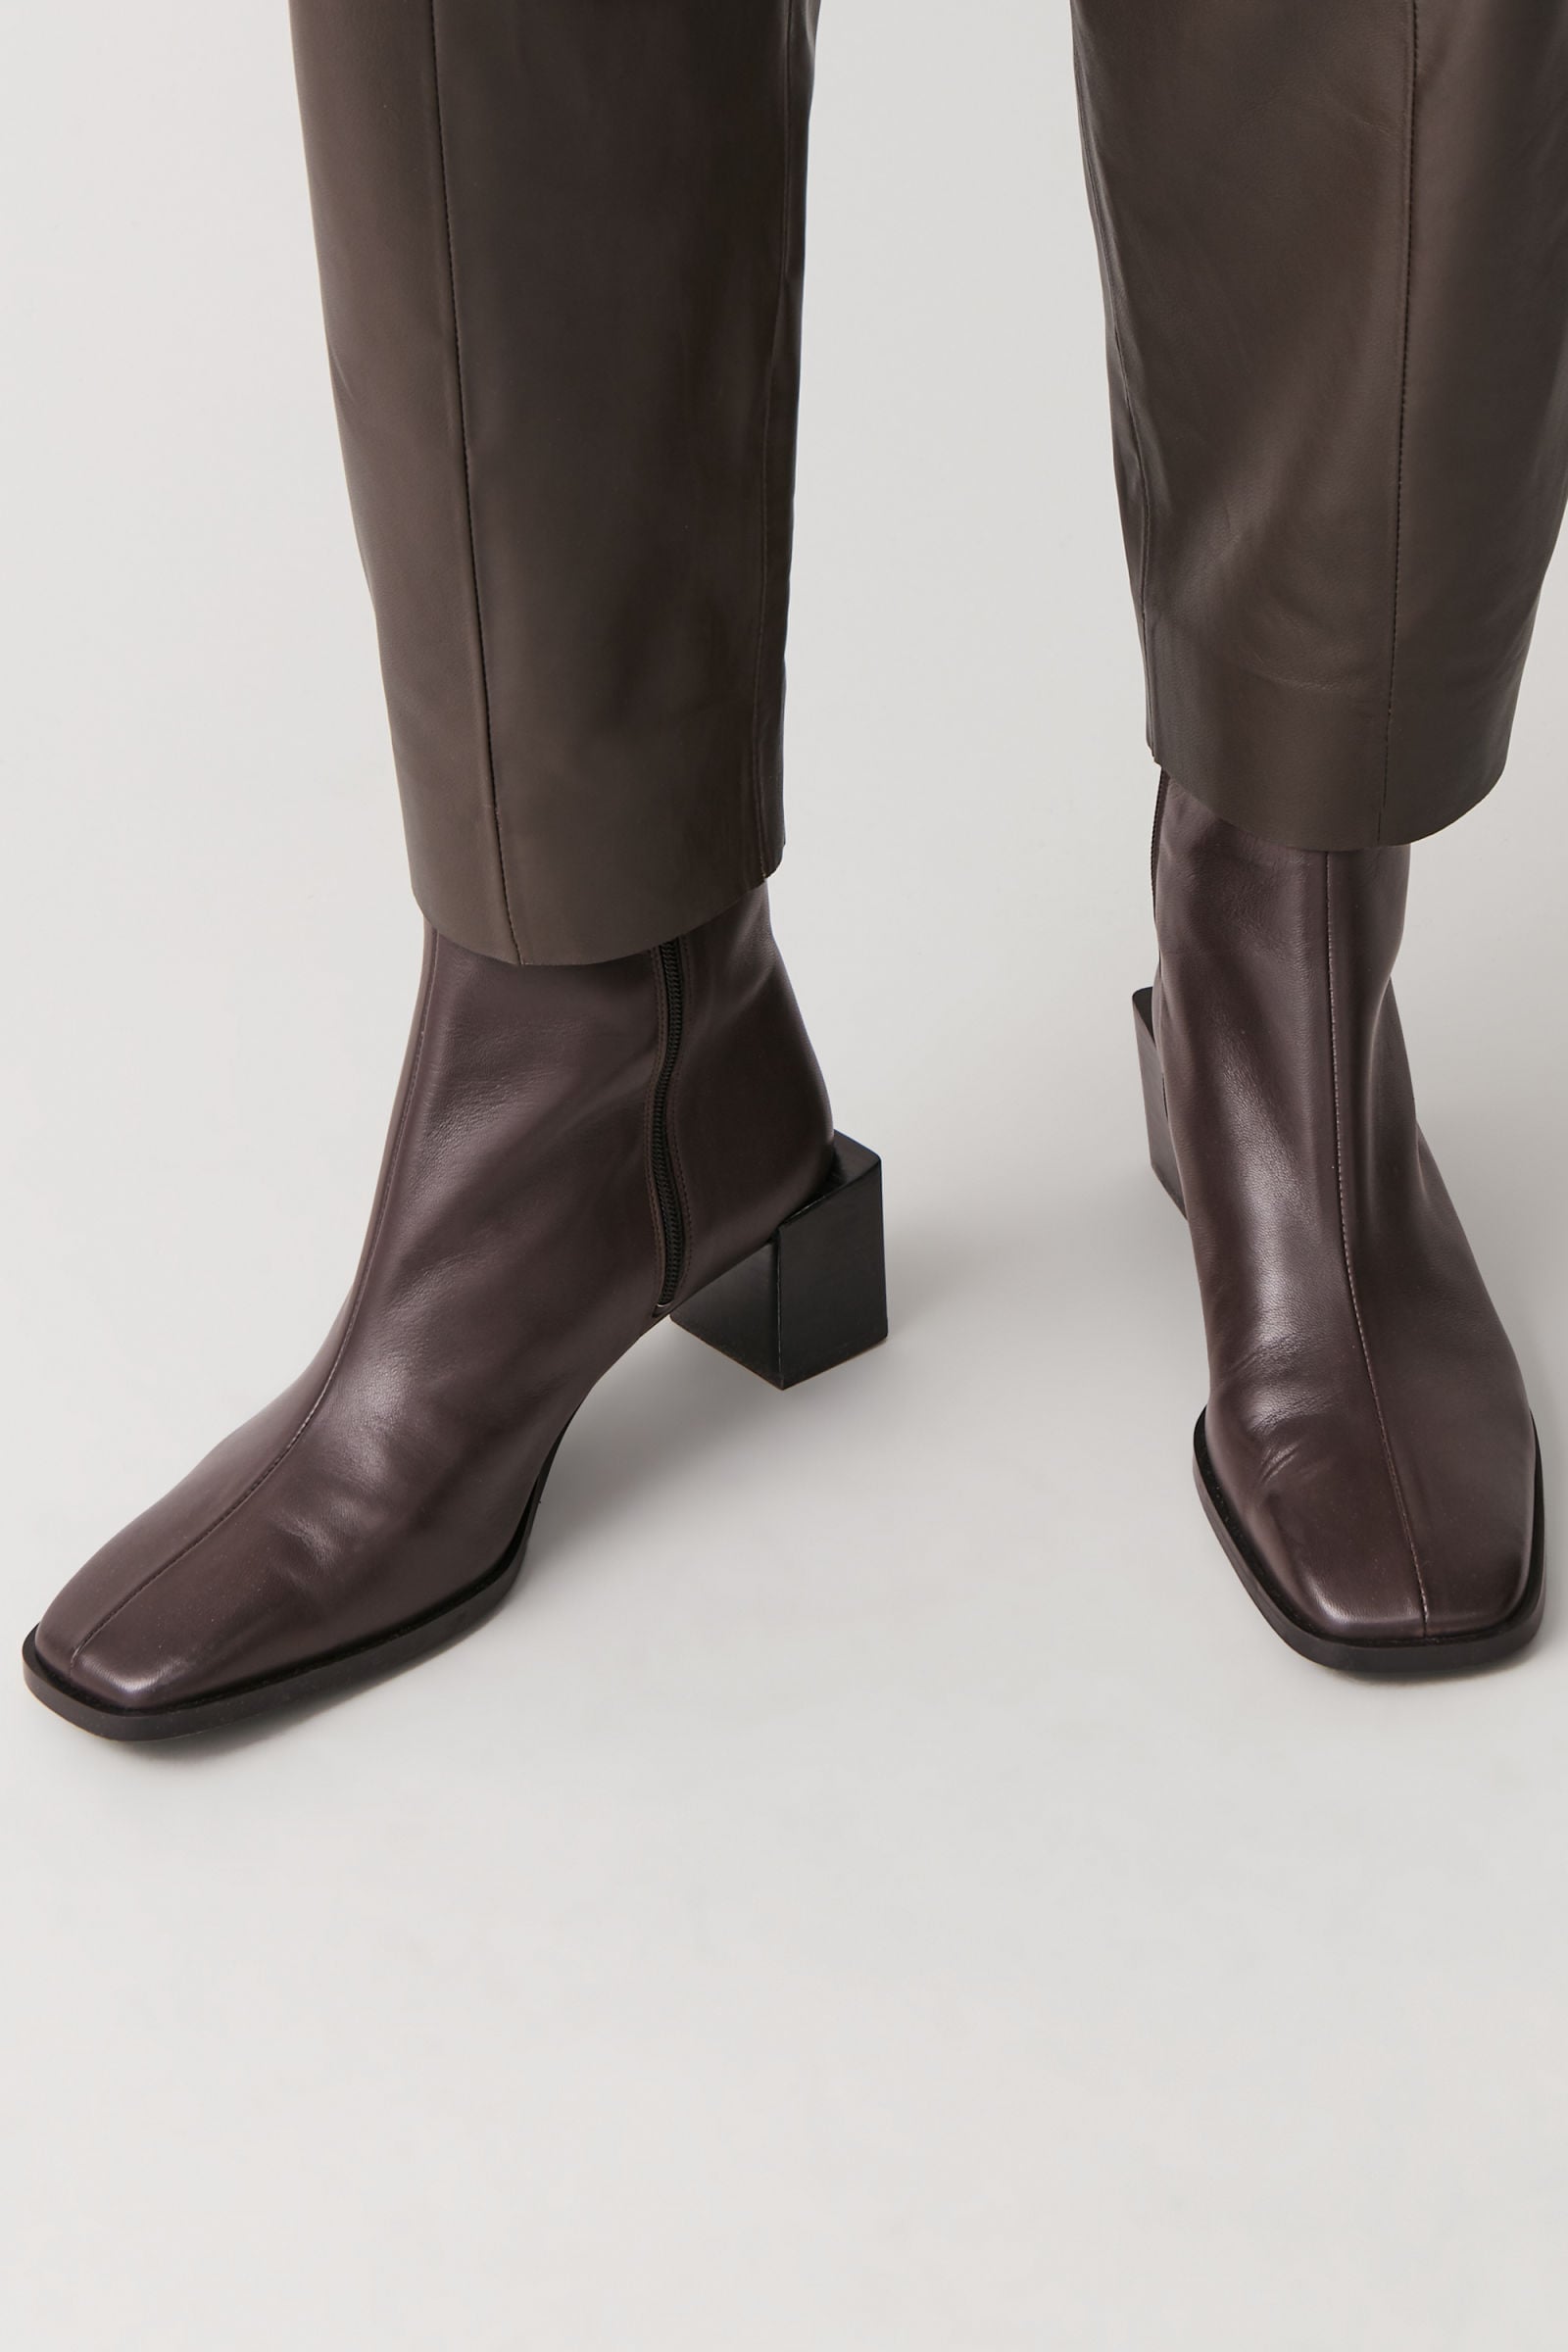 COS Square Toe Leather Ankle Boots | 10 